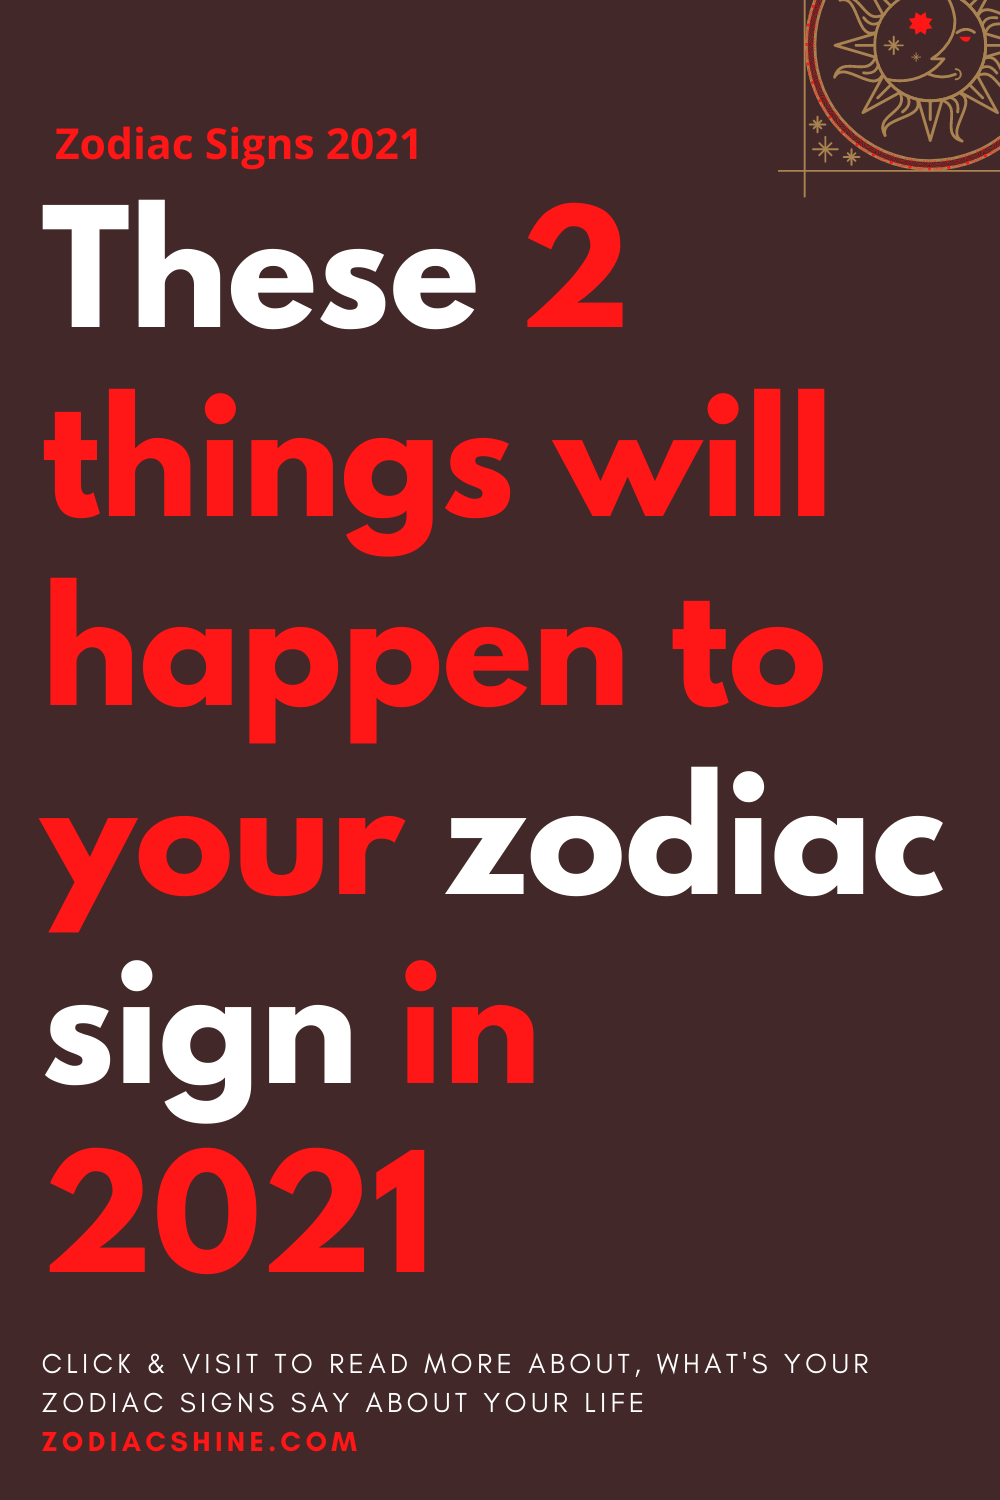 These 2 things will happen to your zodiac sign in 2021